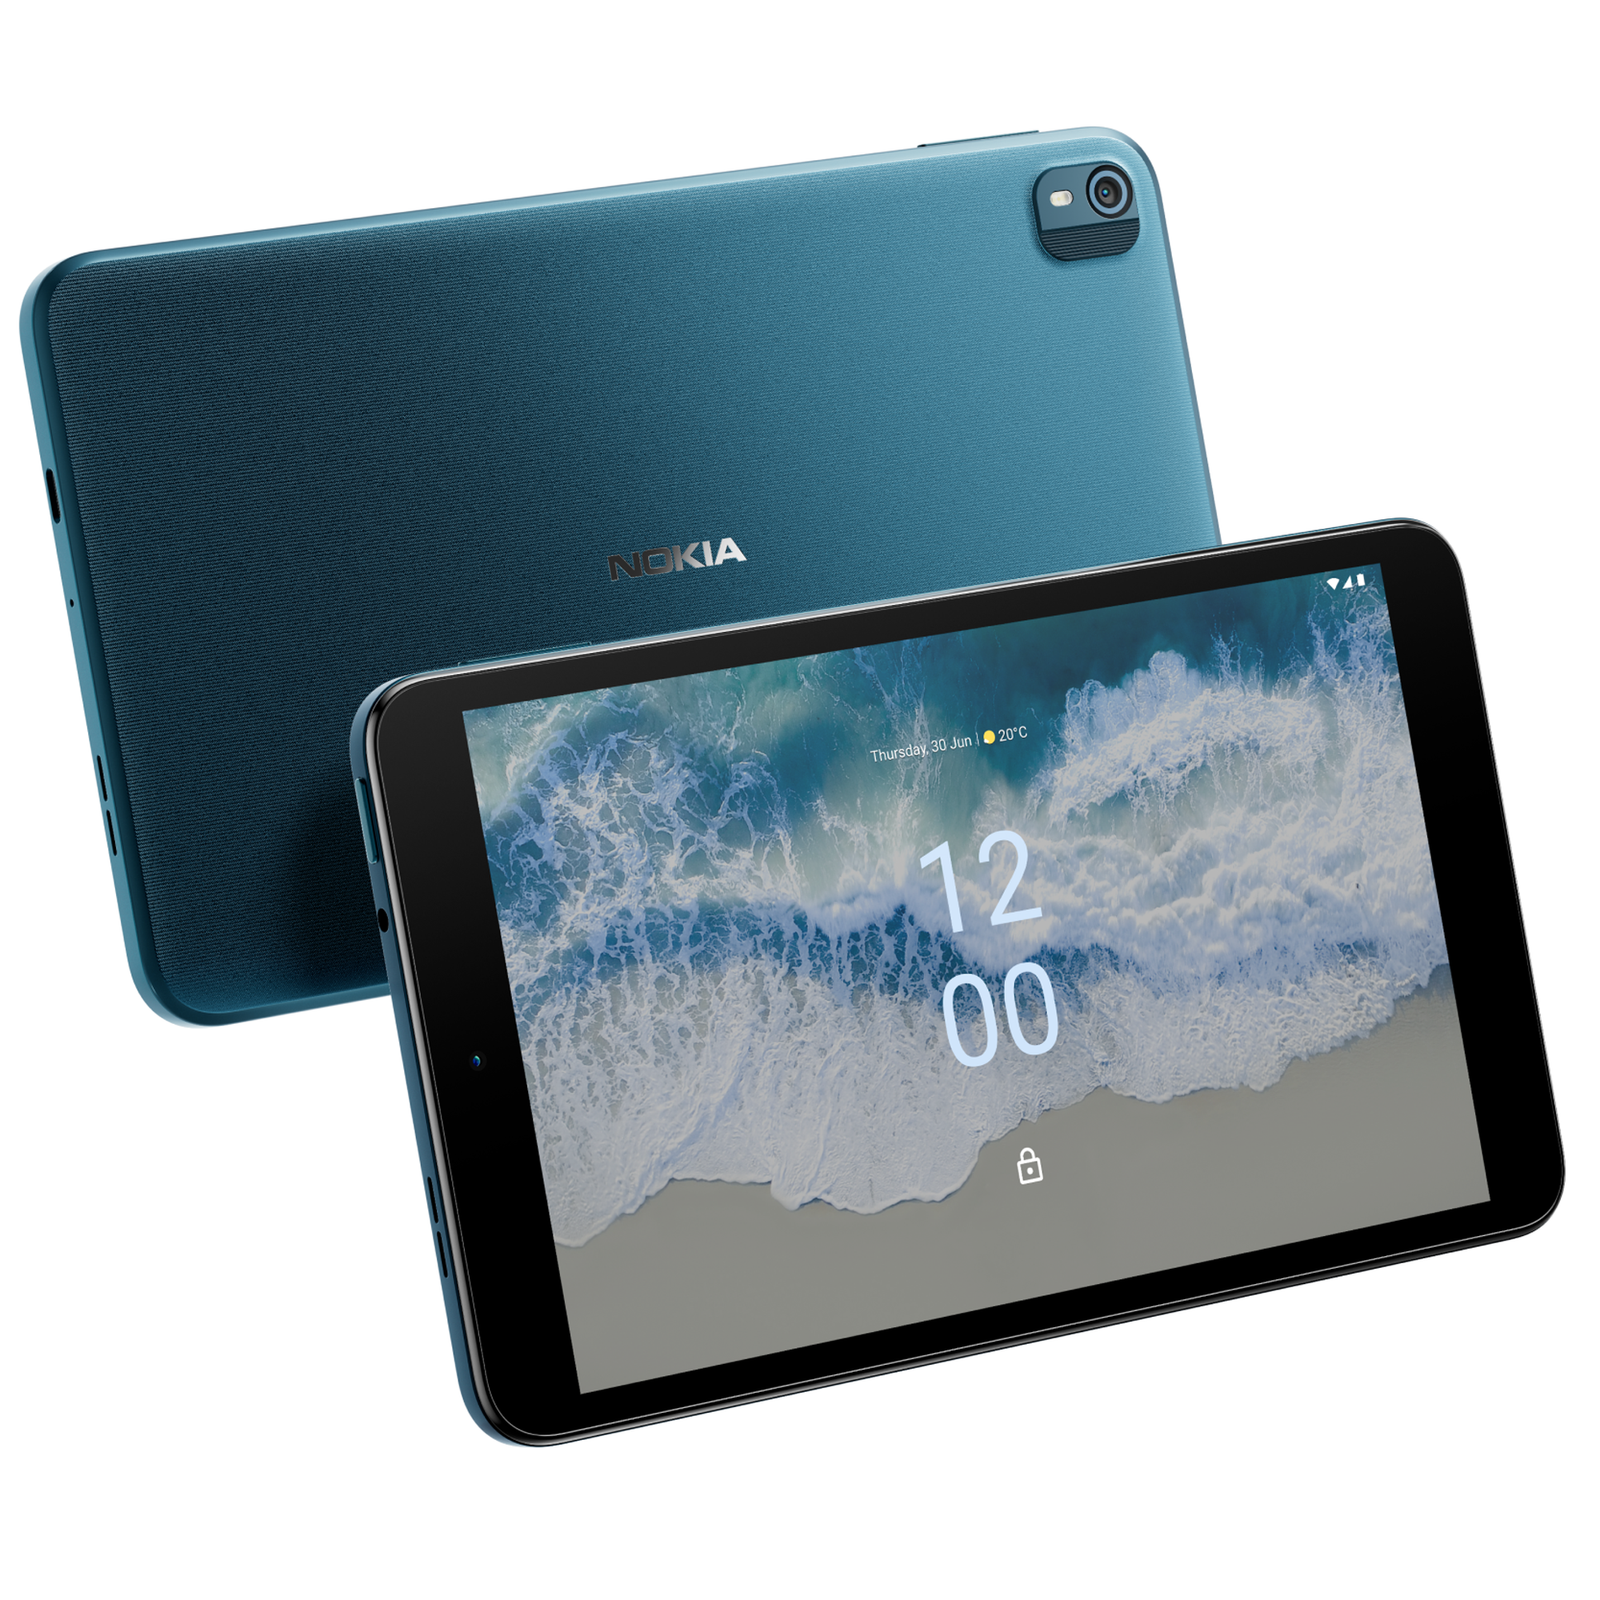 Nokia T10 tablet launched in India; packs all-day portable power and connectivity